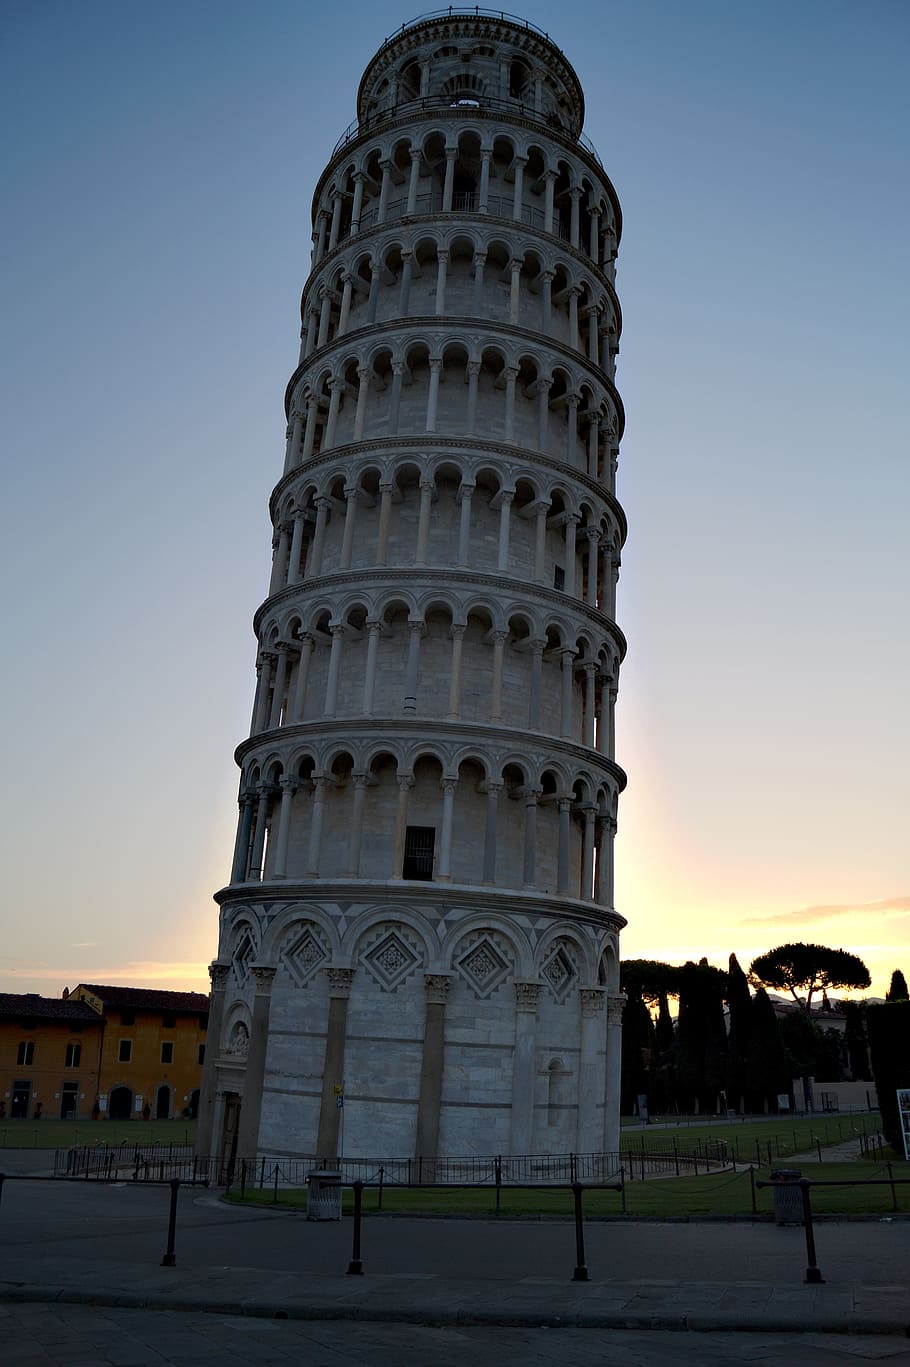 leaning, tower, pisa, italy, leaning tower, tuscany, places of interest, building, landmark, dome